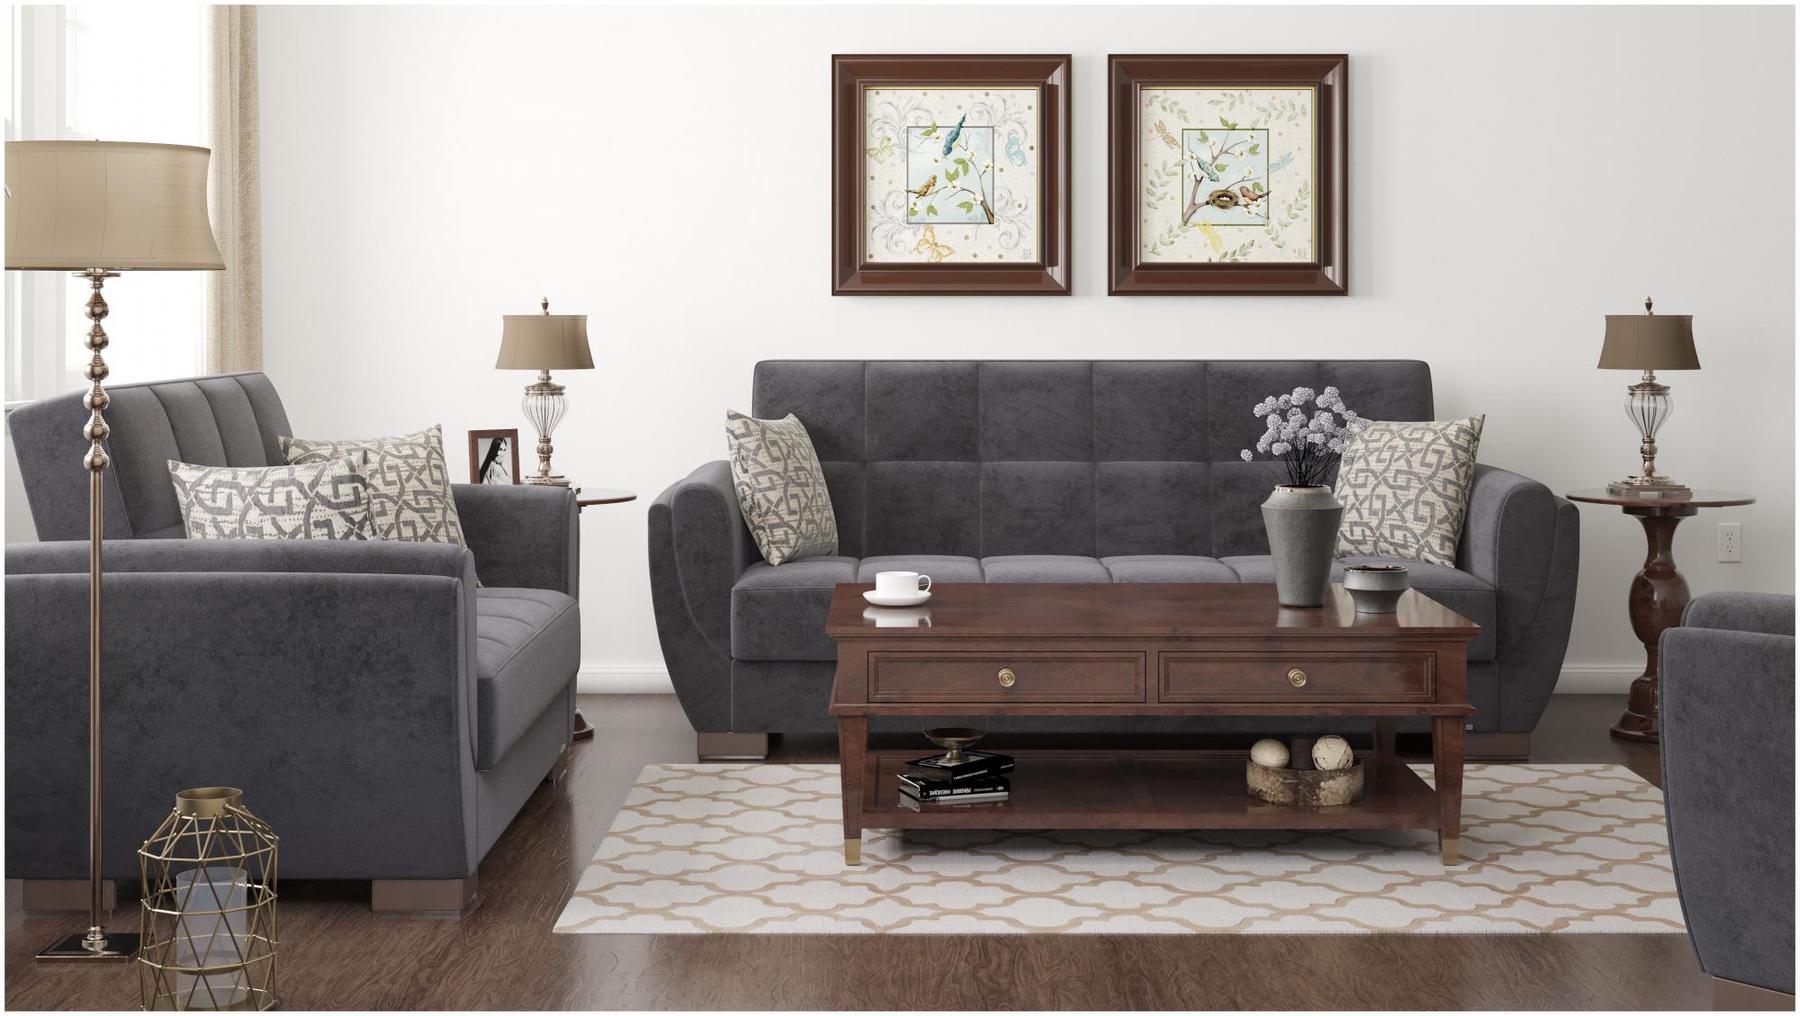 Modern design, Black , Microfiber upholstered convertible sleeper Sofabed with underseat storage from Voyage Shelter by Ottomanson in living room lifestyle setting with another piece of furniture. This Sofabed measures 94 inches width by 36 inches depth by 41 inches height.